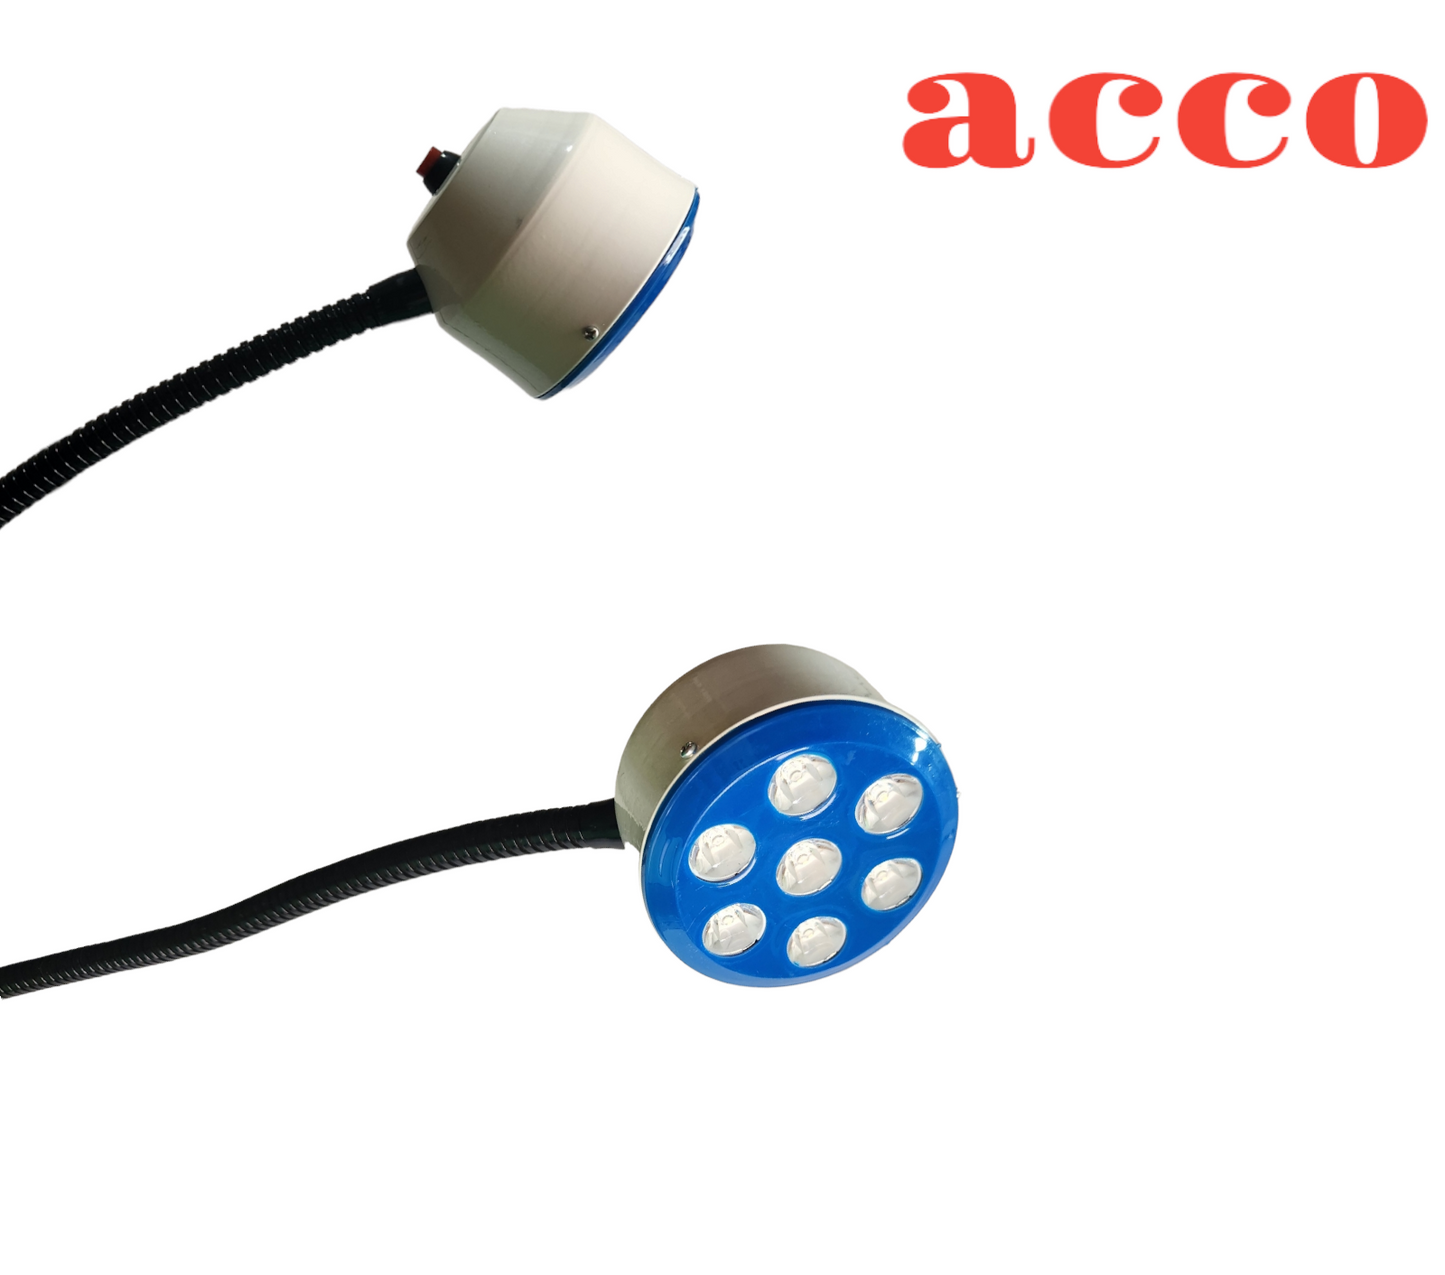 acco Examination OT Light with 7 Led Mobile 25000 LUX Glass Examination OT Light (White)